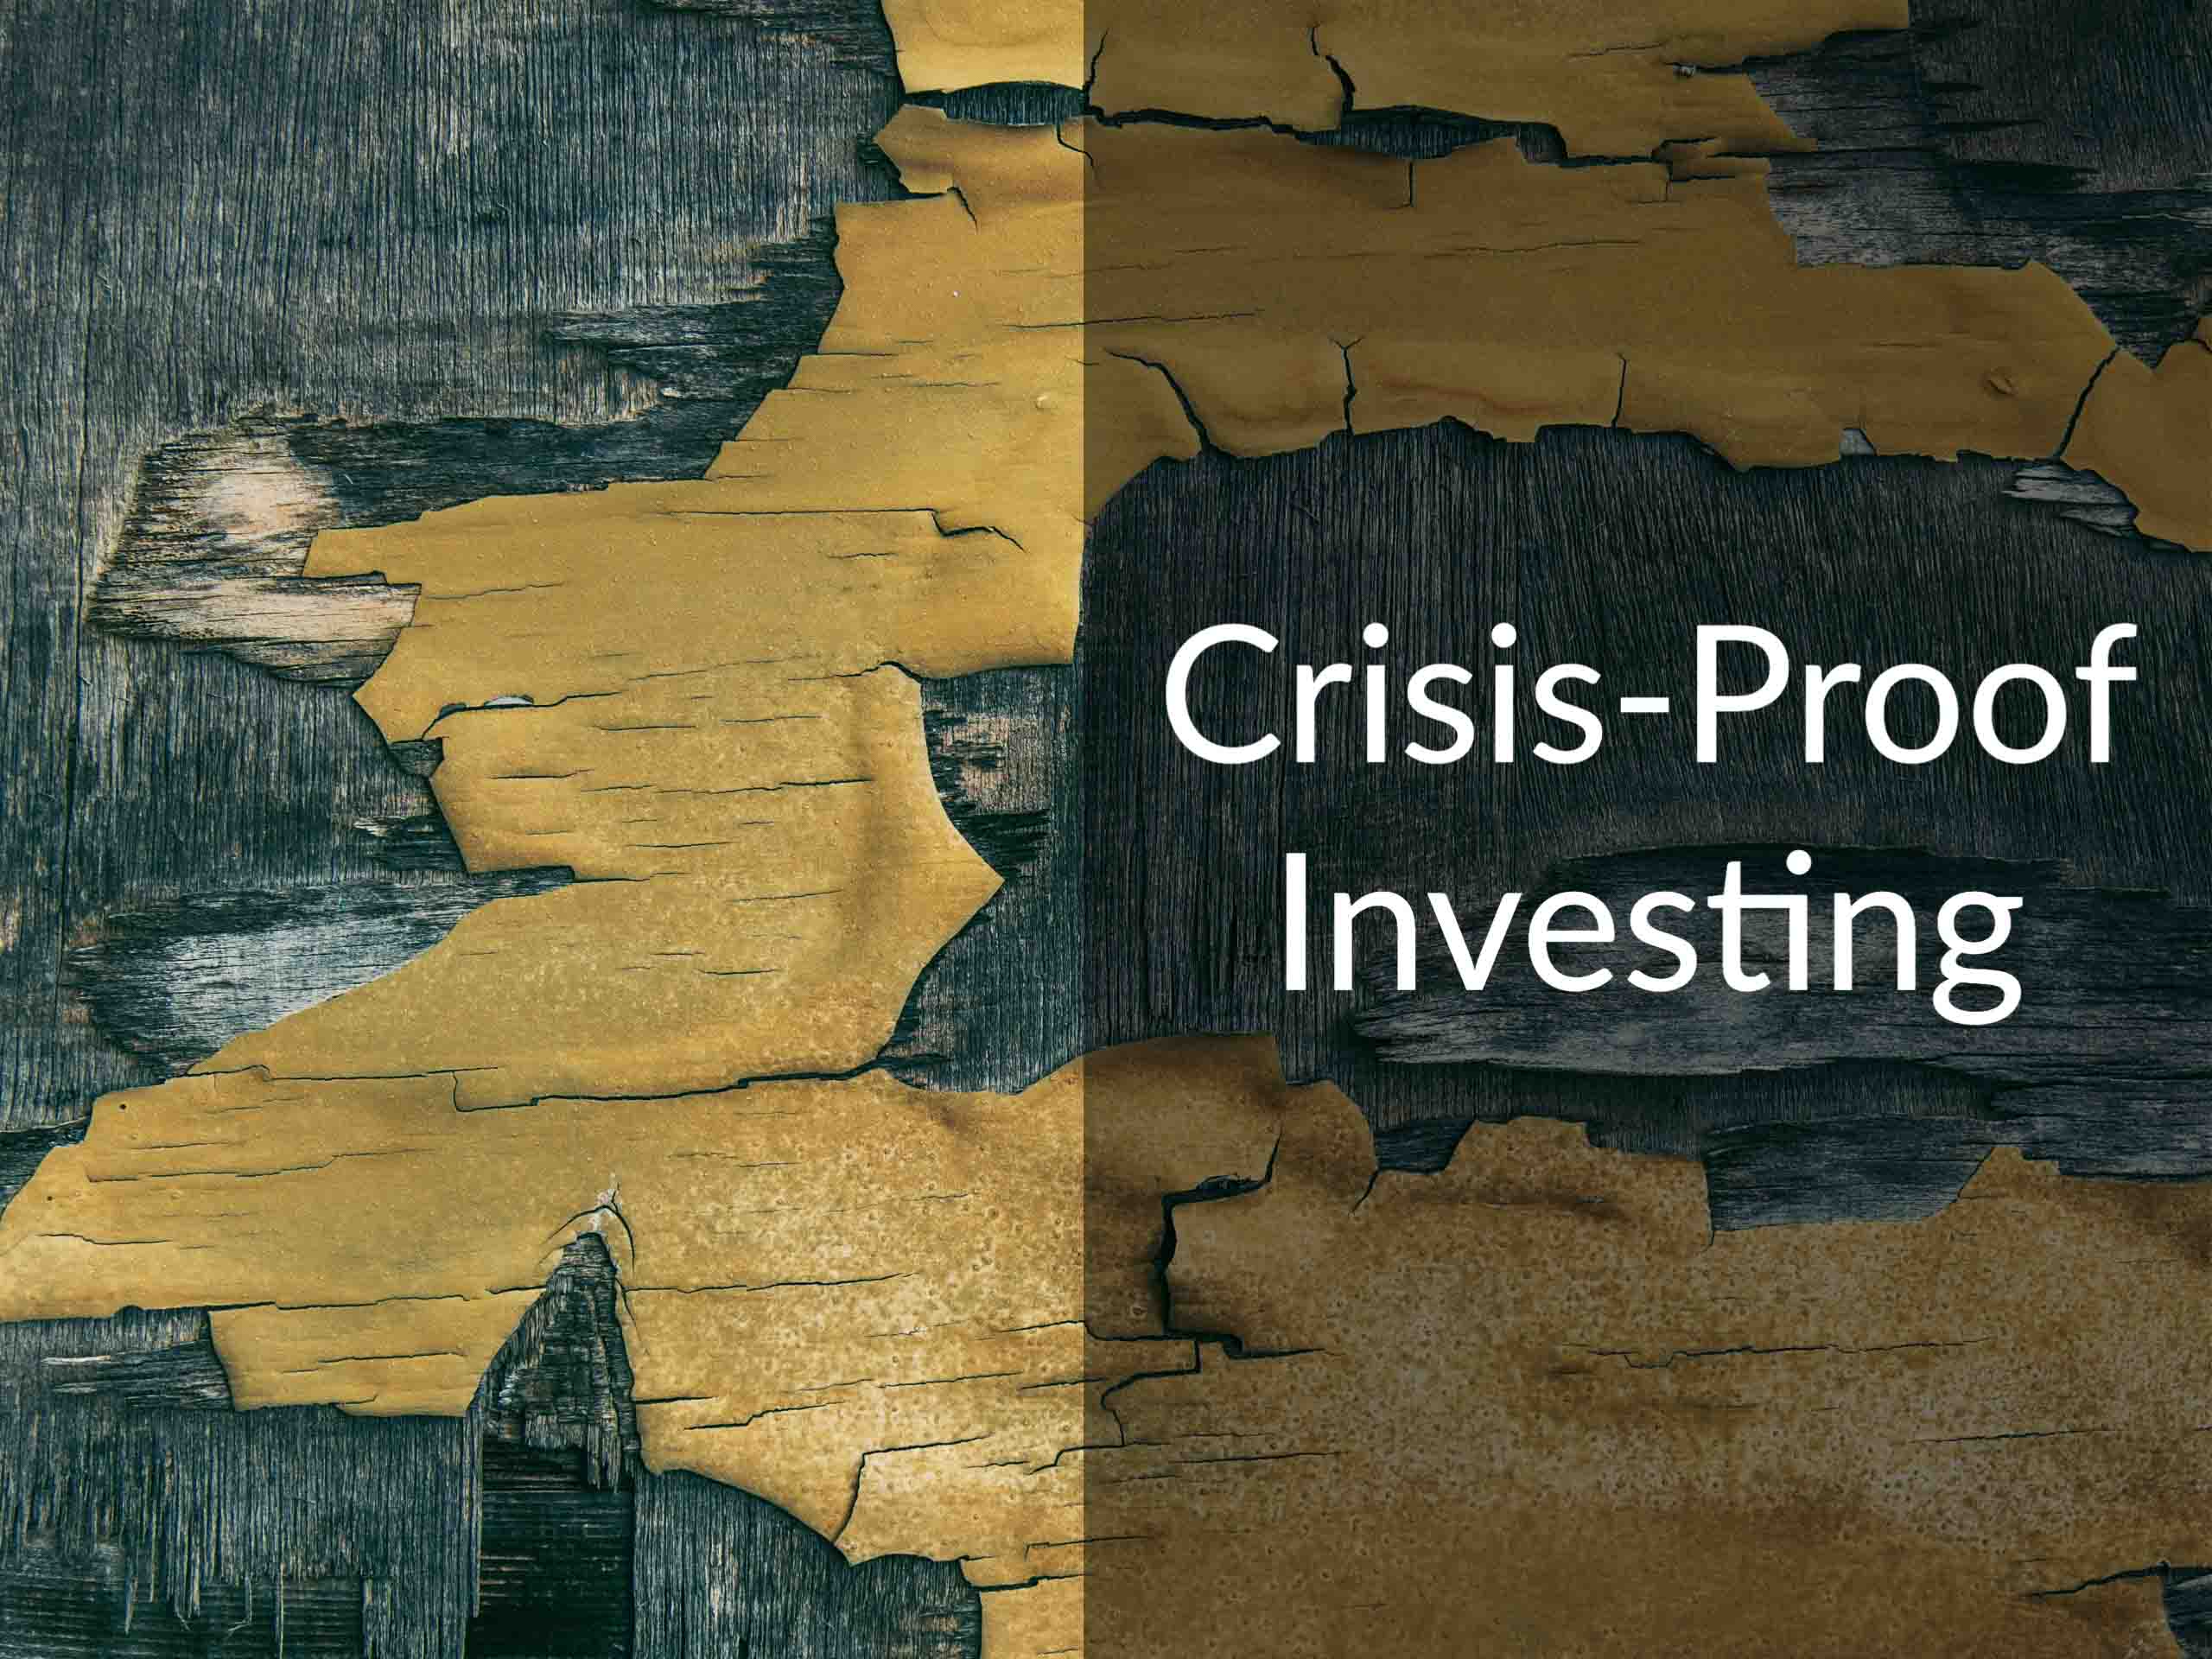 442: Crisis-Proof Investing: Strategies for a Shaky Future